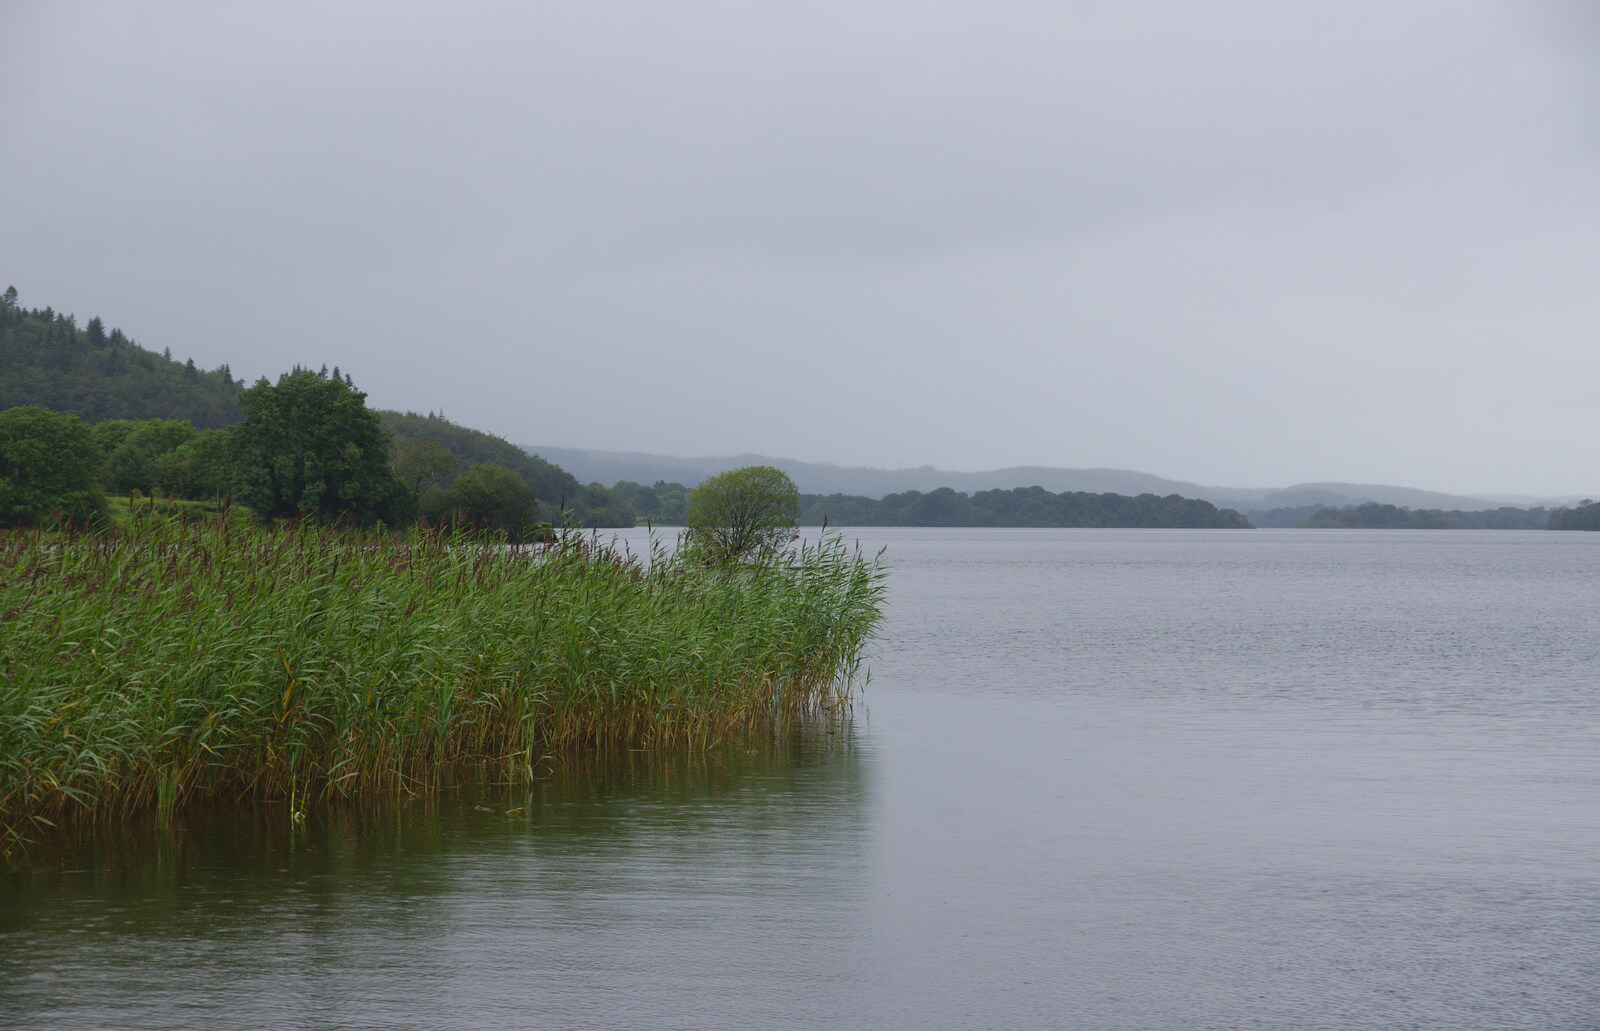 Lough Macnean Upper from Travels in the Borderlands: An Blaic/Blacklion to Belcoo and back, Cavan and Fermanagh, Ireland - 22nd August 2019